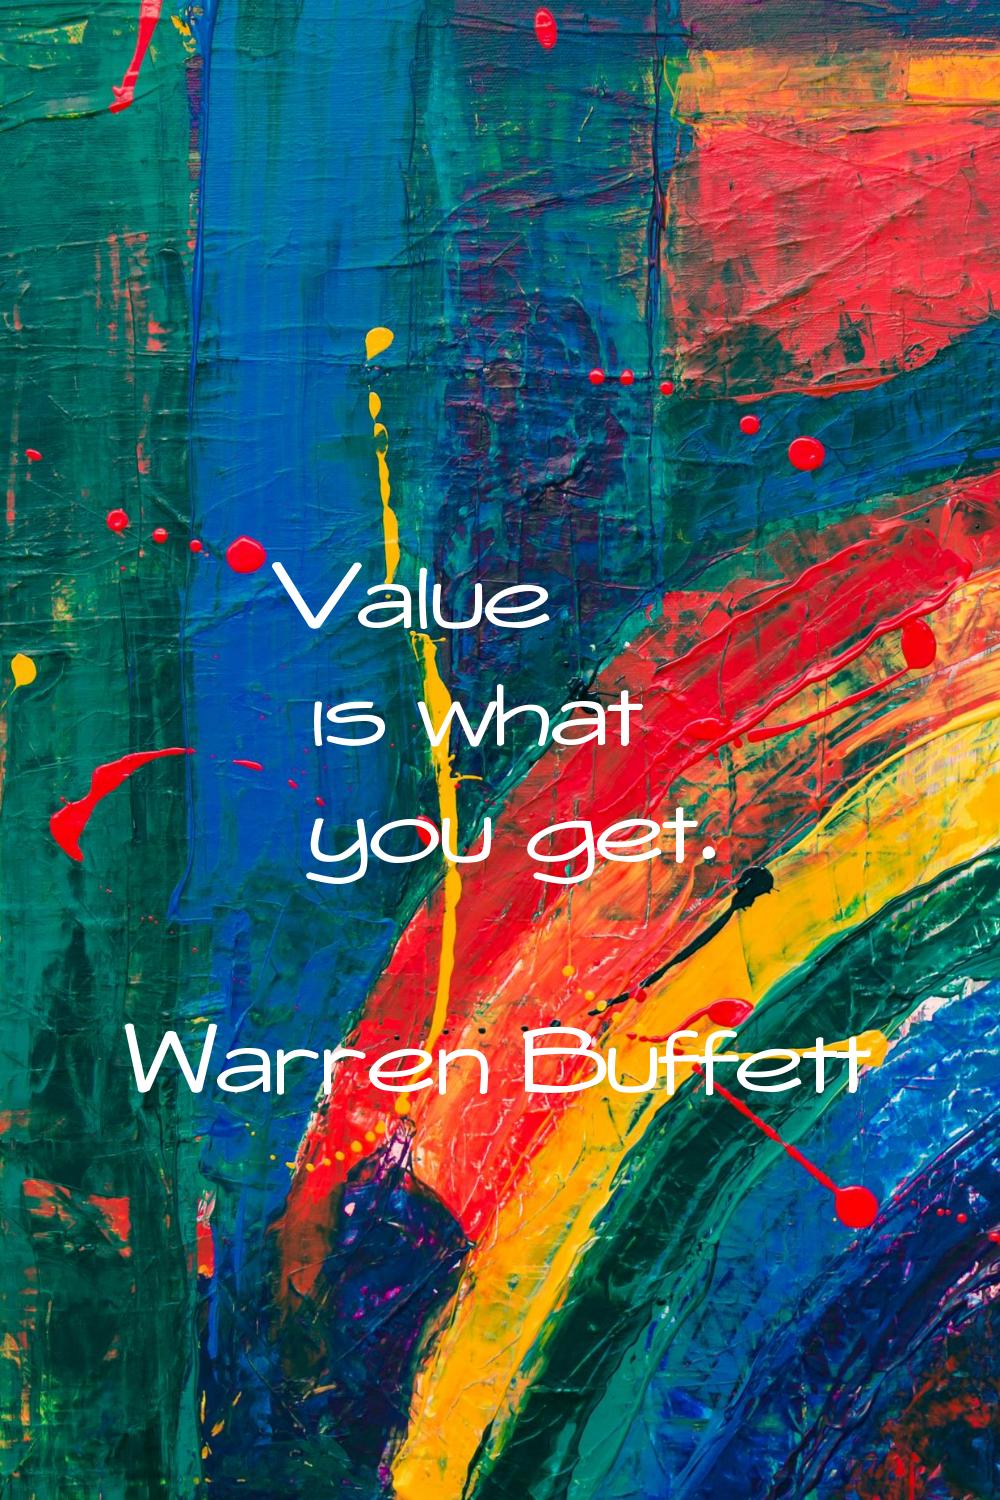 Value is what you get.